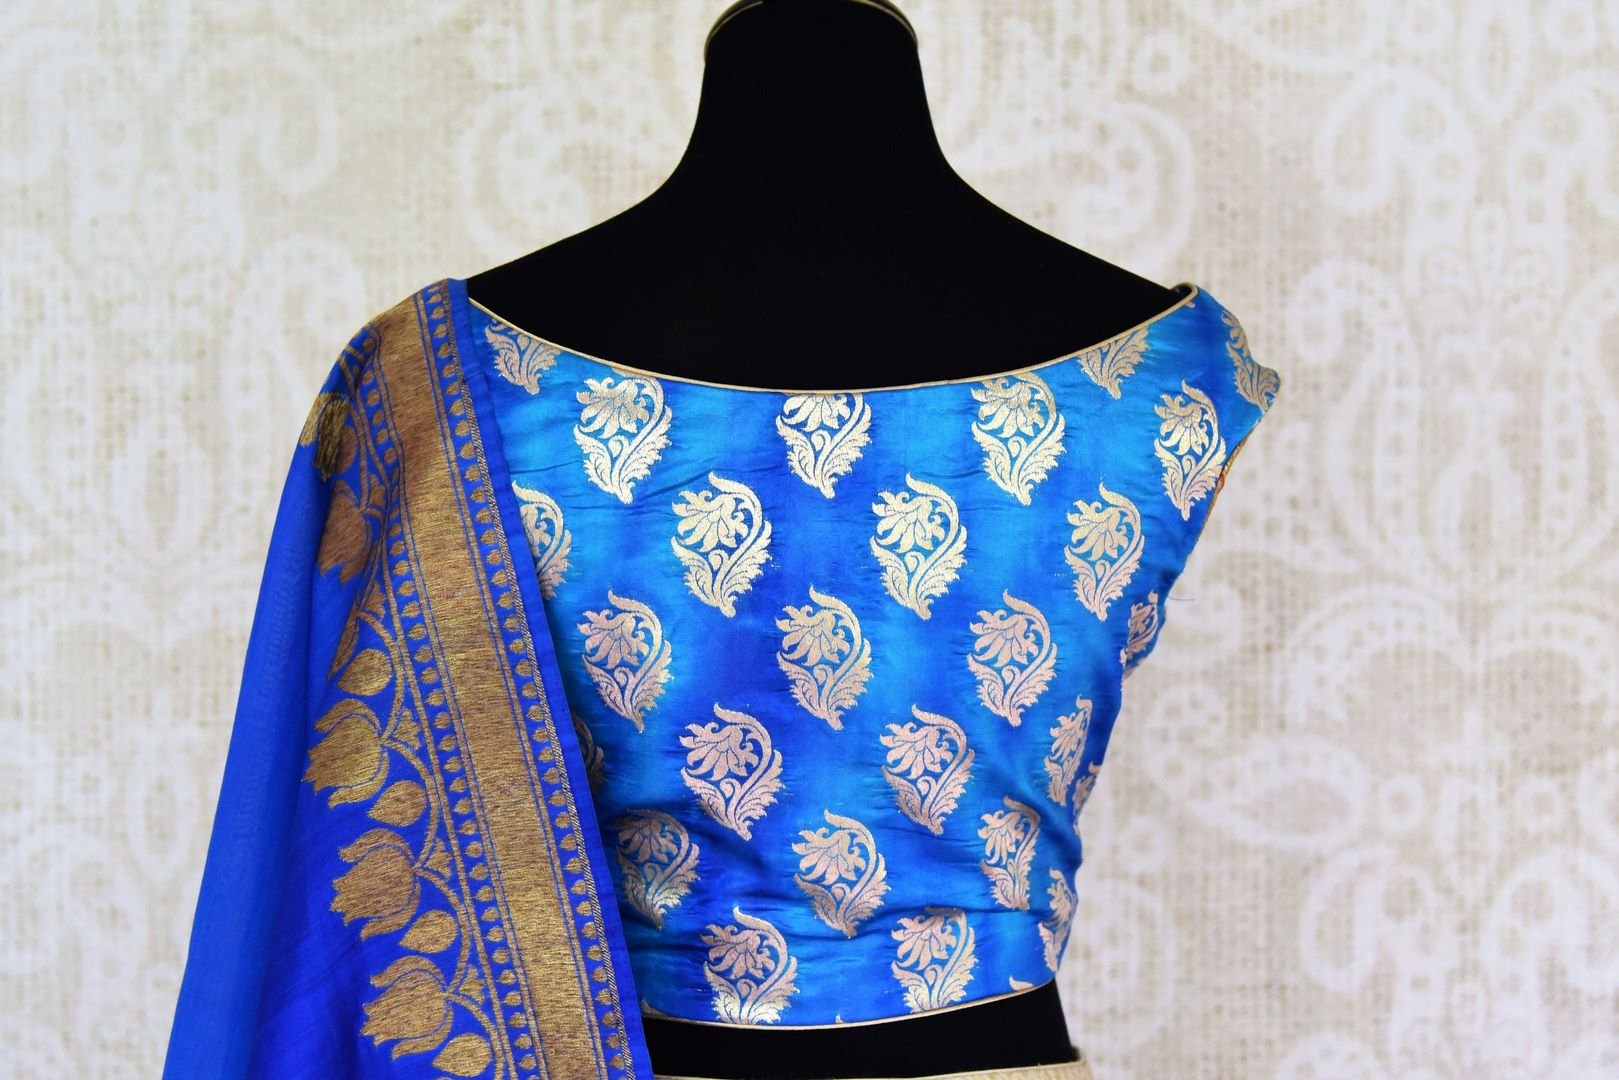 Buy gold Banarasi silk lehenga with blue sleeveless choli online in USA and dupatta. Find a range of stunning designer lehengas in USA at Pure Elegance Indian clothing store. Elevate your traditional style with a range of designer sarees, Indian clothing, and much more also available at our online store.-blouse back